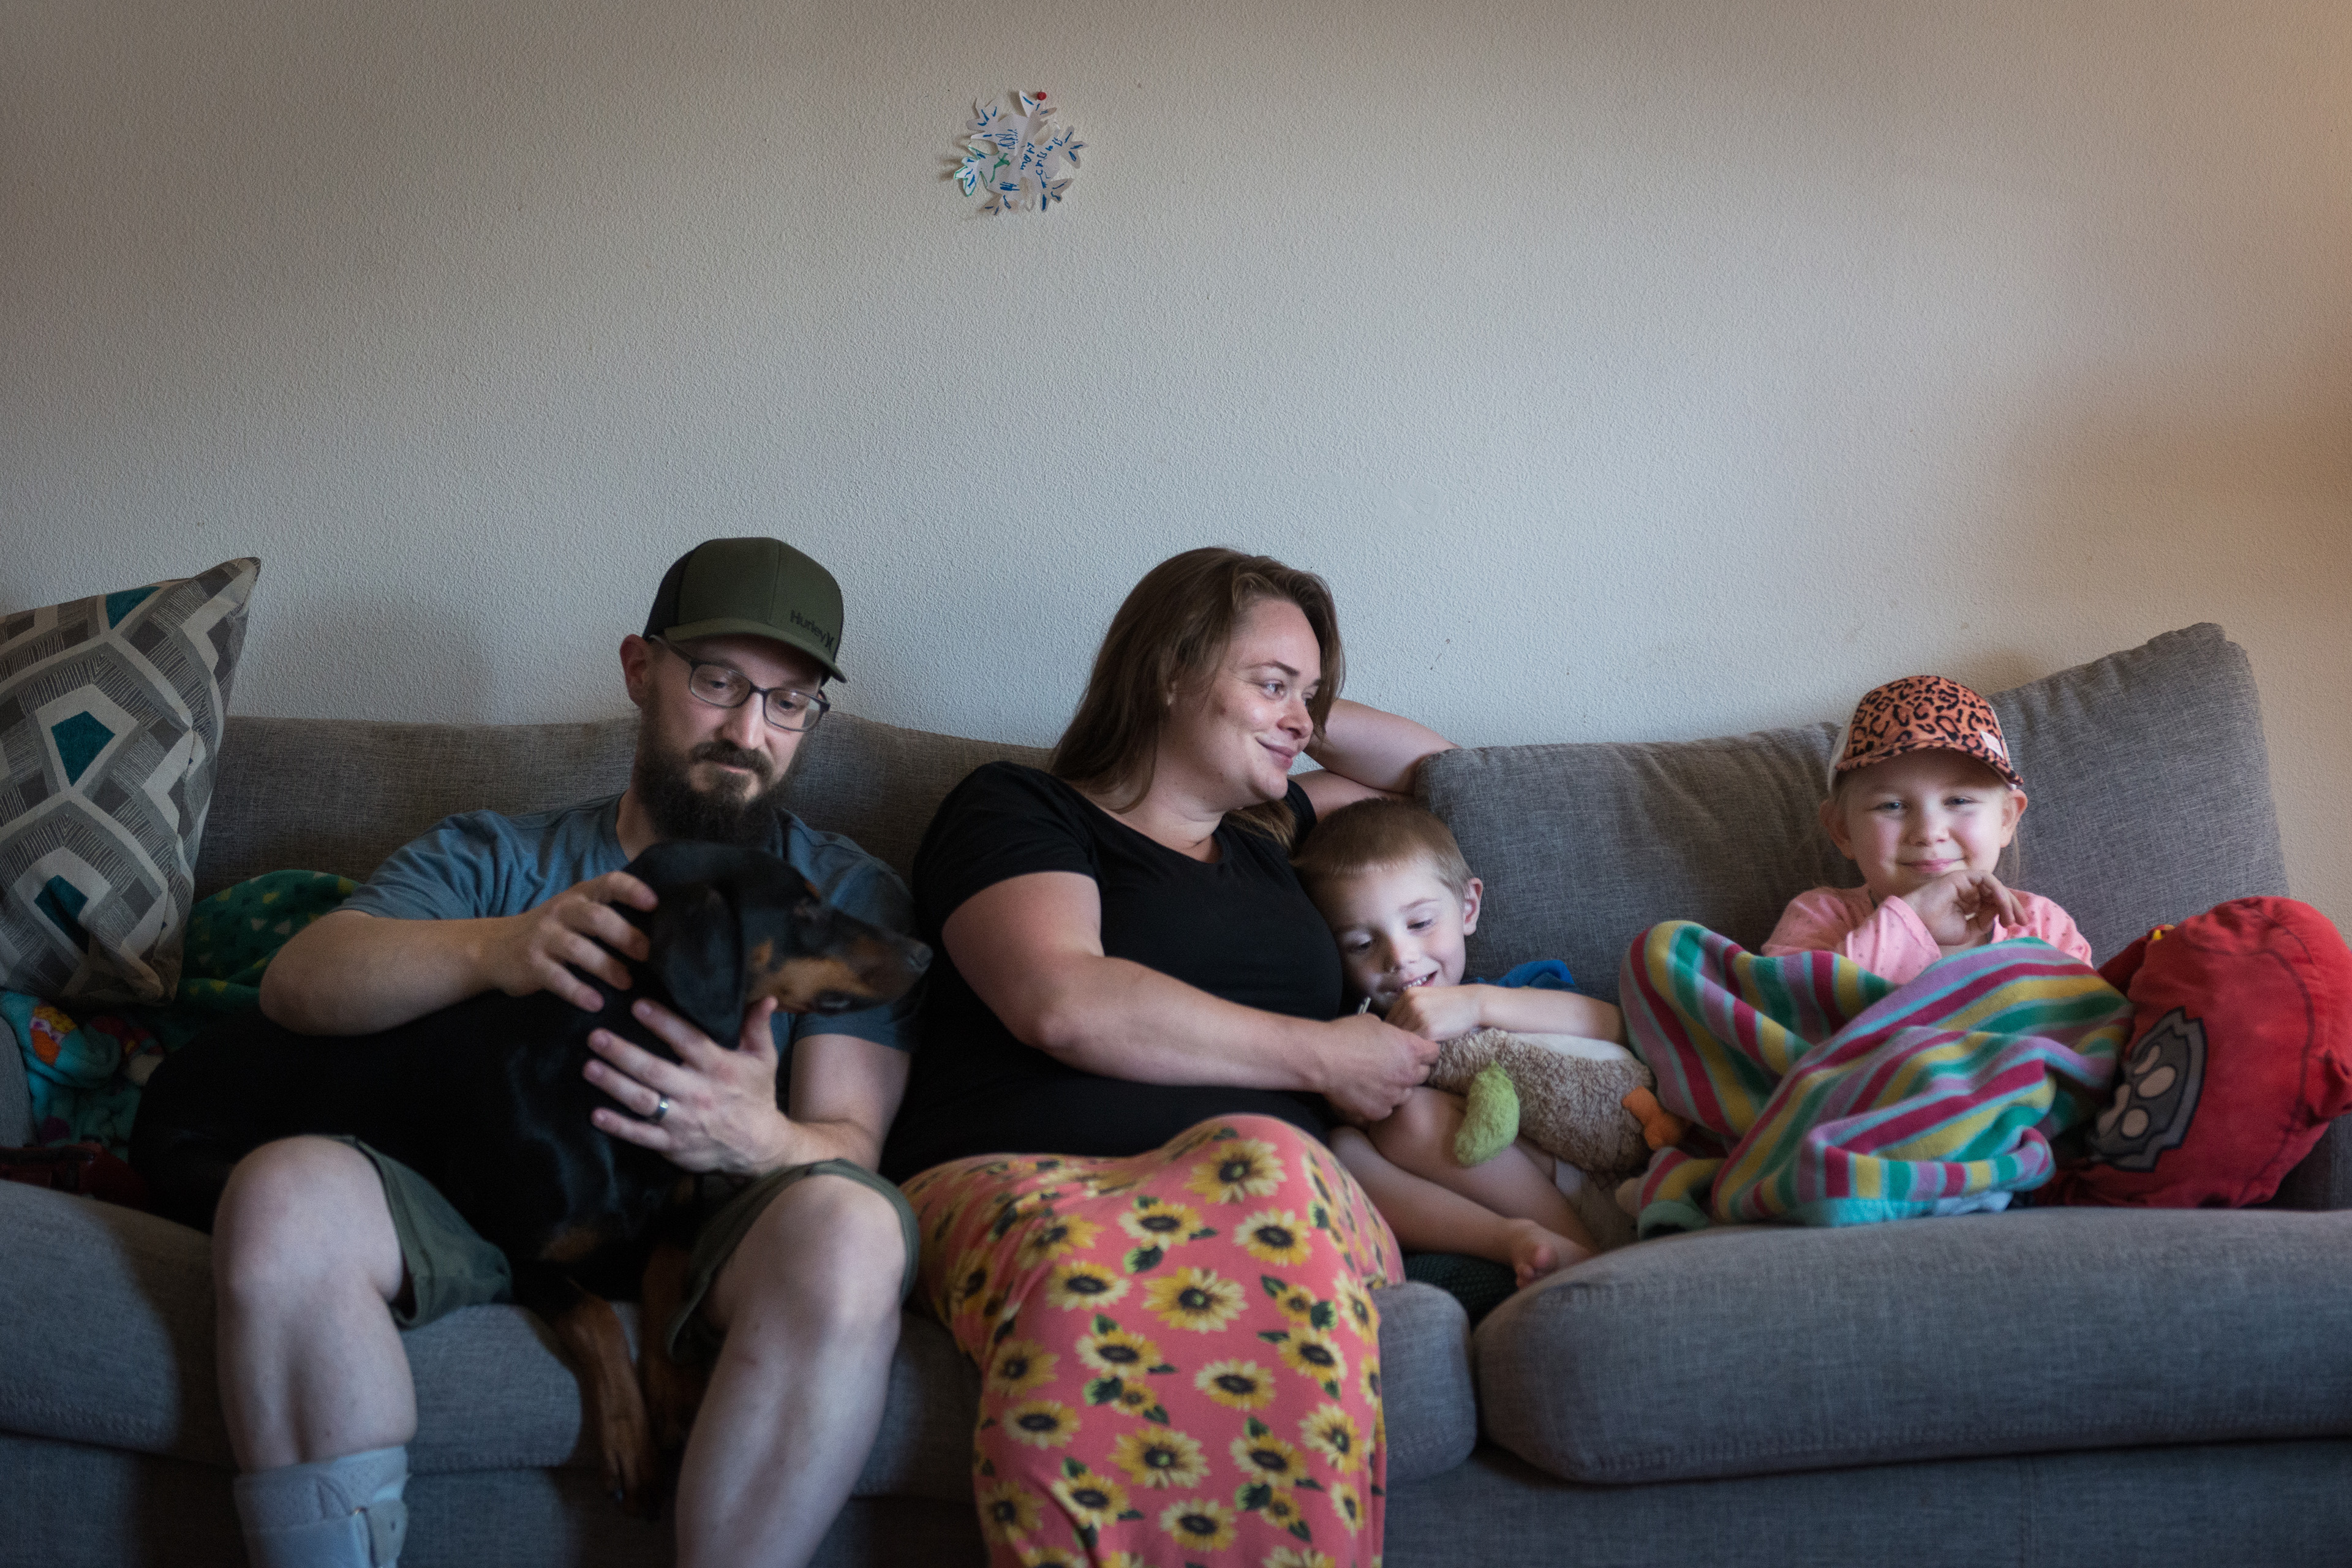 The Lewis family — from left, the father, Spencer, holds their dog on his lap. Beside him is his wife, Deborah, who holds their son, Owen. Their daughter, Annabelle, is wrapped in a colorful blanket to the far right.